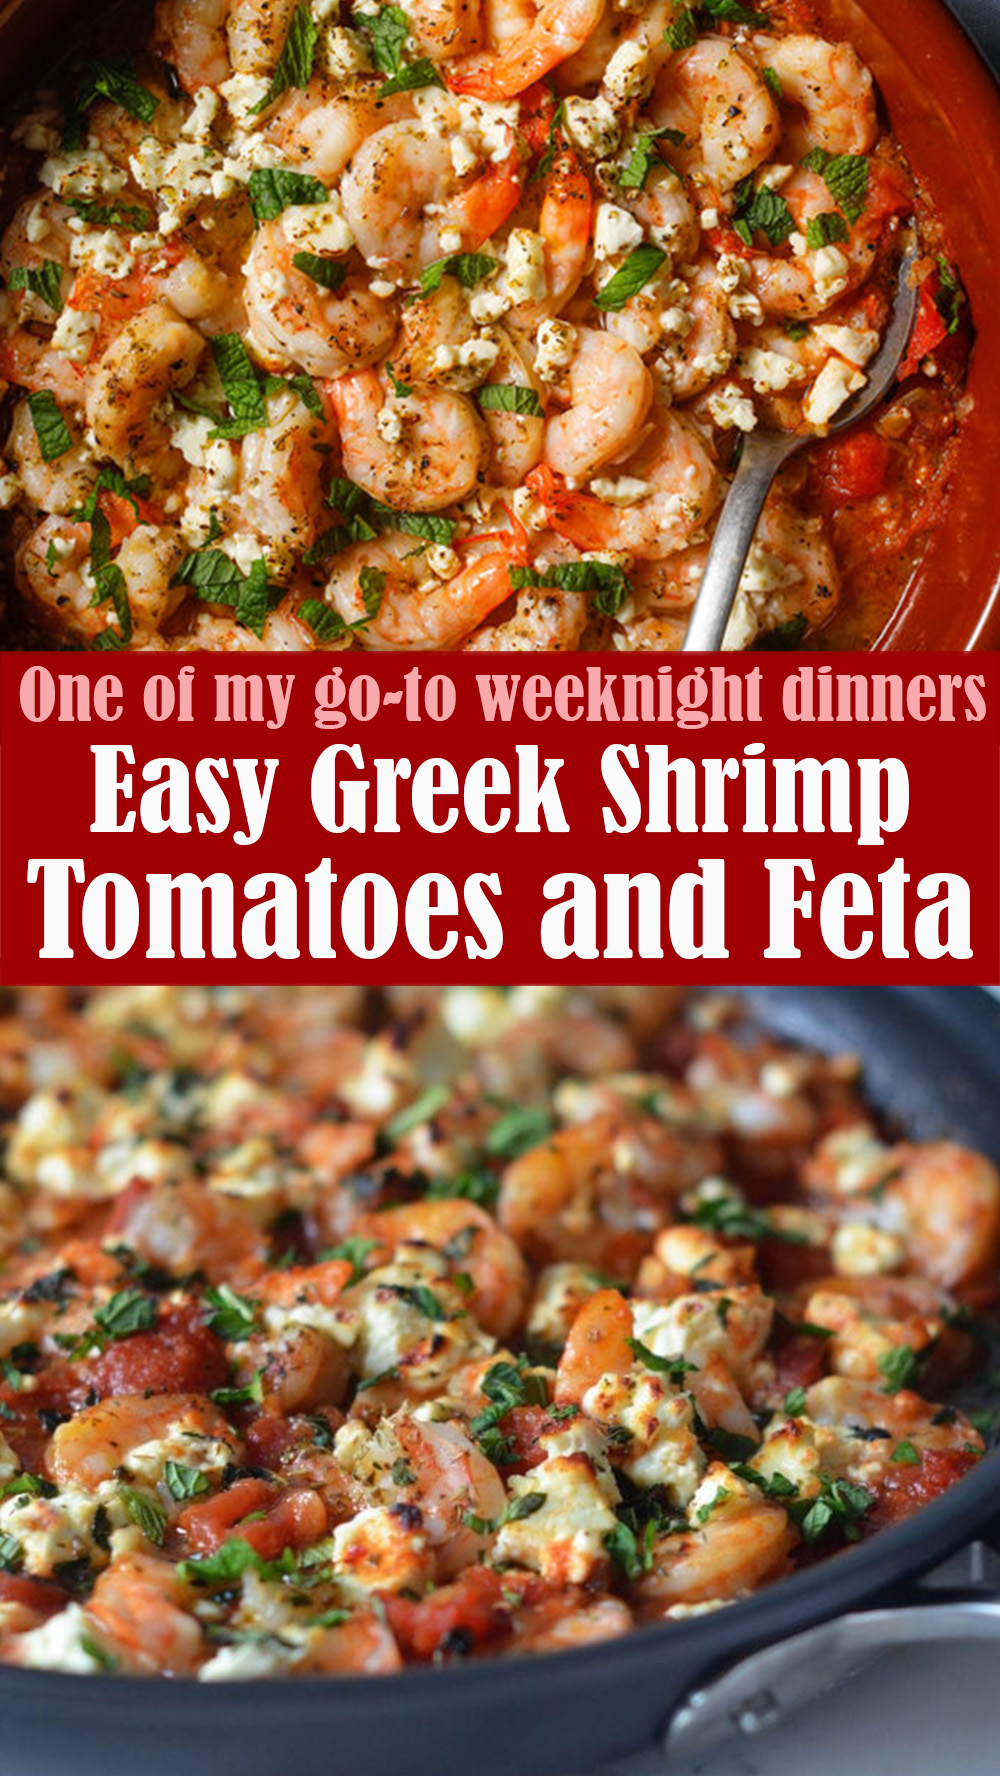 Easy Greek Shrimp with Tomatoes and Feta